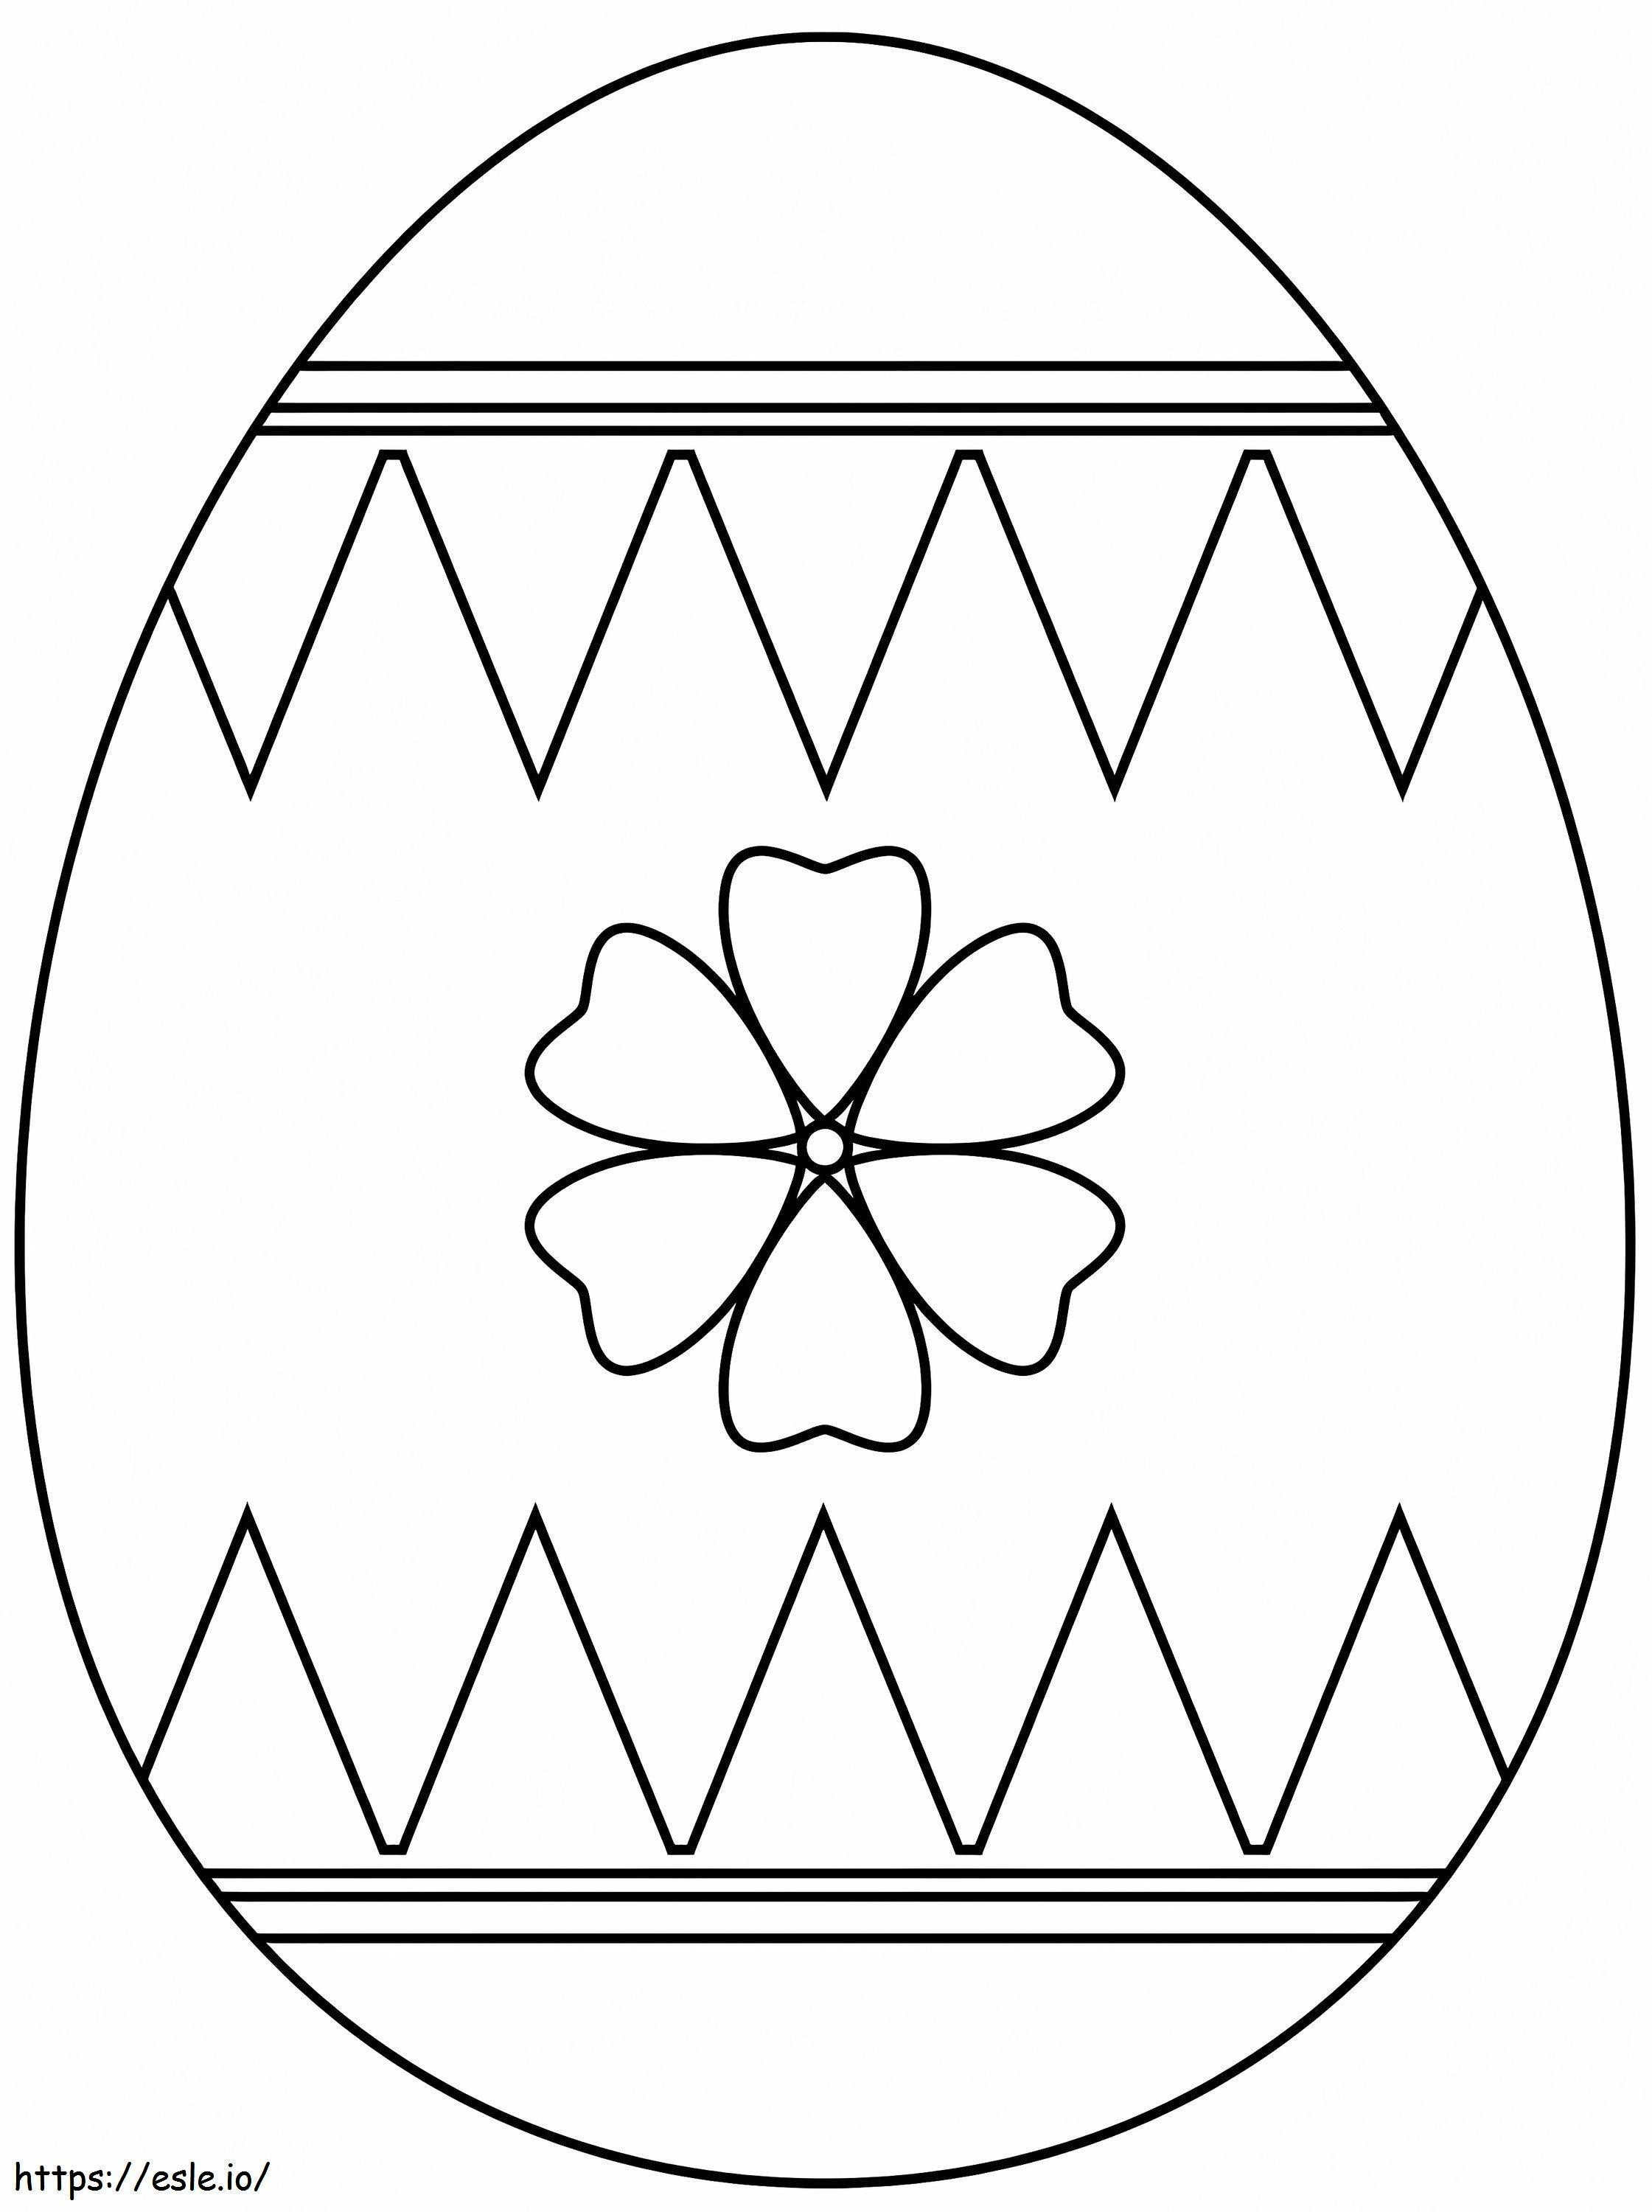 Pretty Easter Egg 4 coloring page